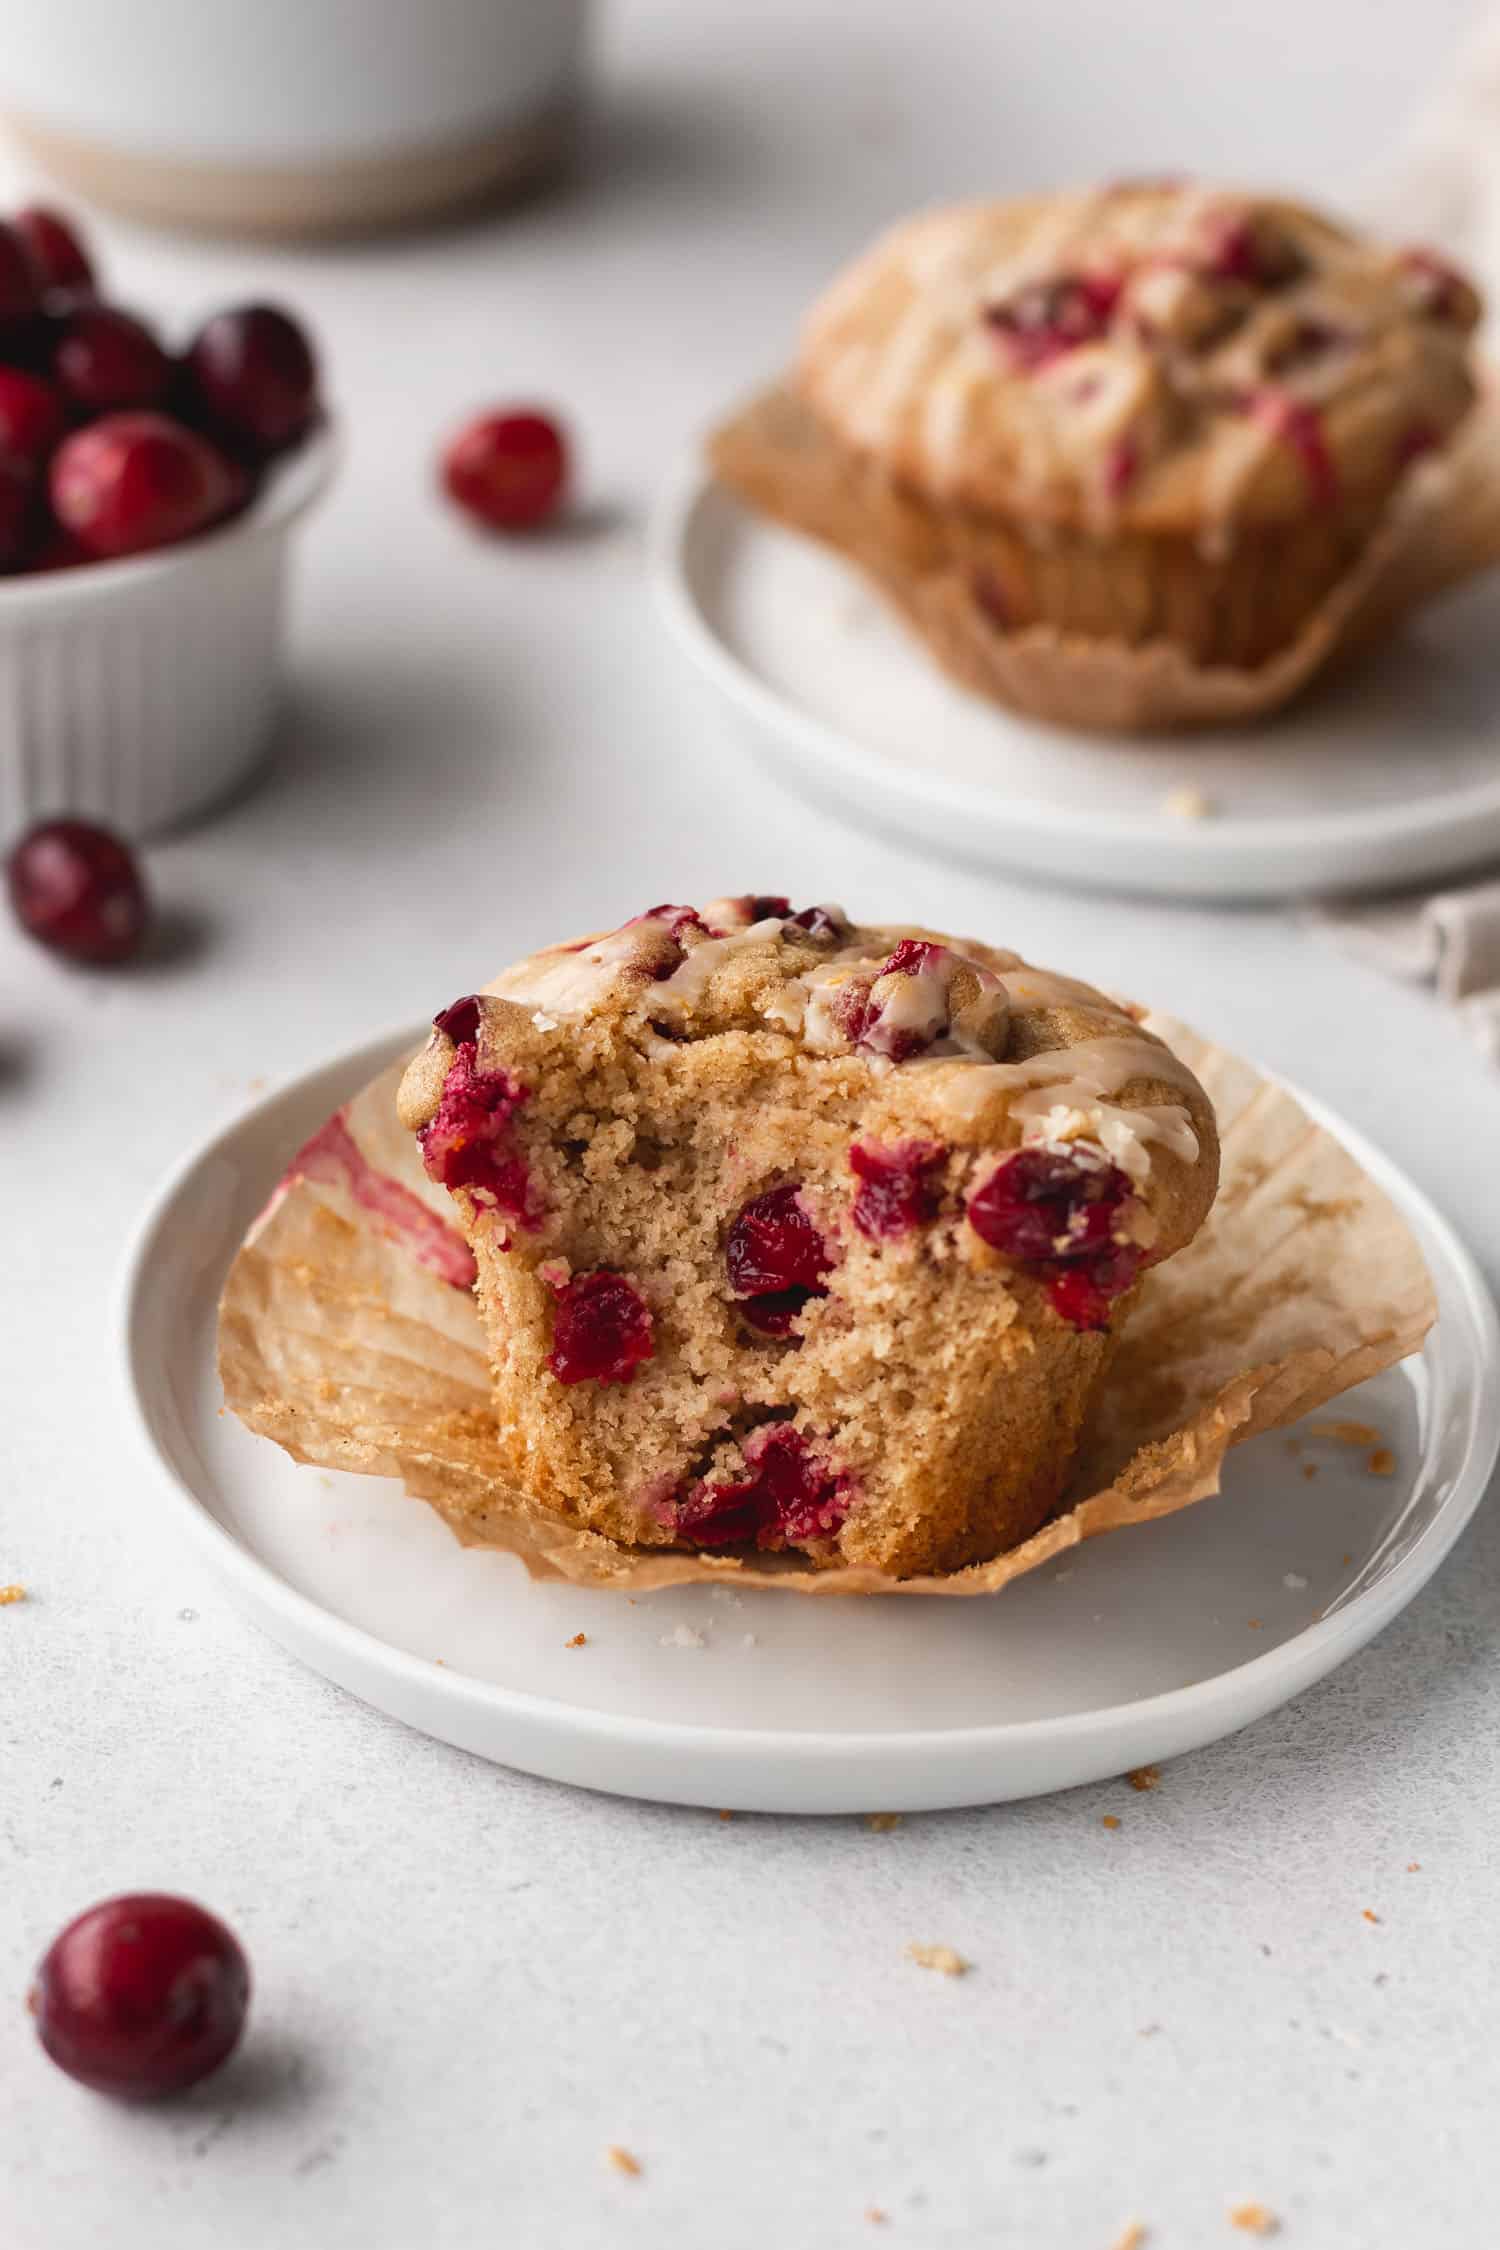 Gluten free cranberry muffin on a plate with a bite taken out